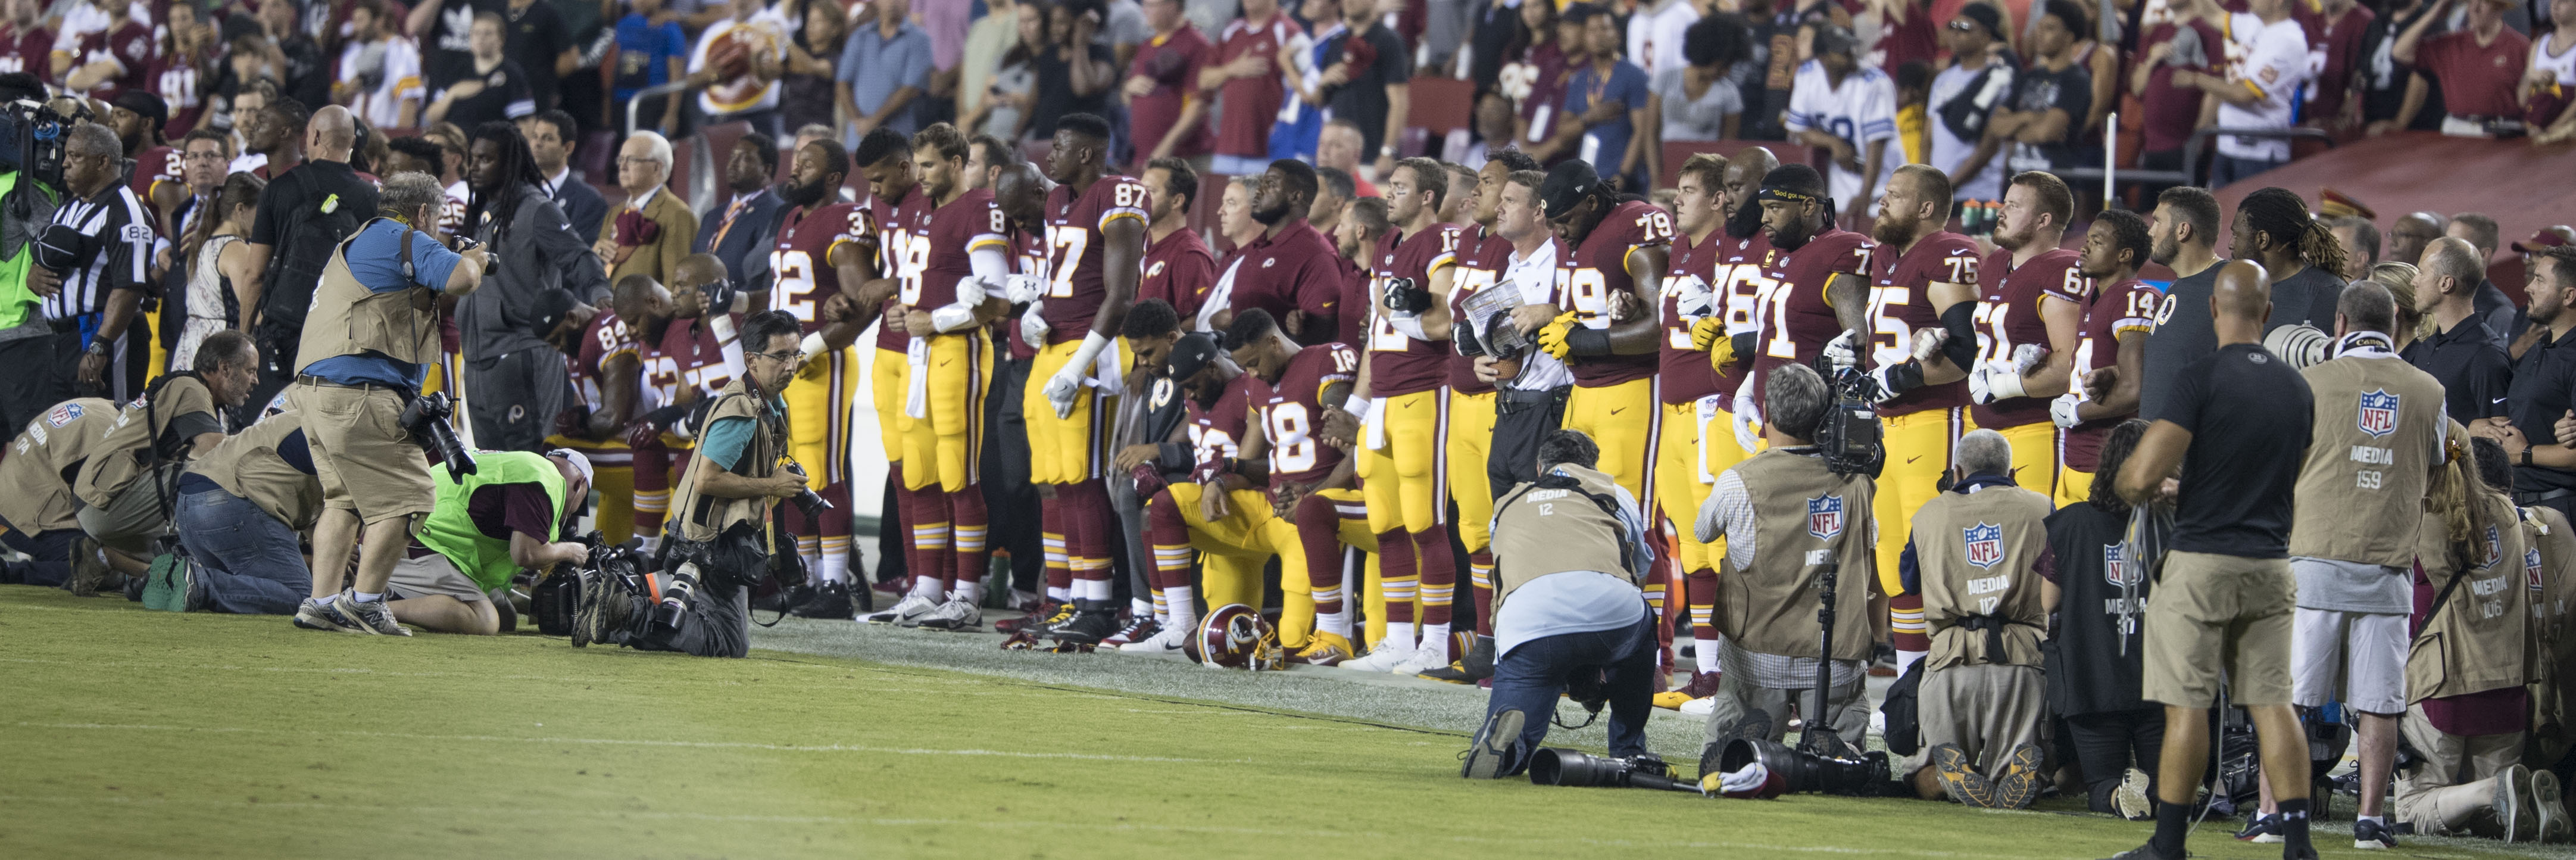 Opinion: NFL, sports will stand unified